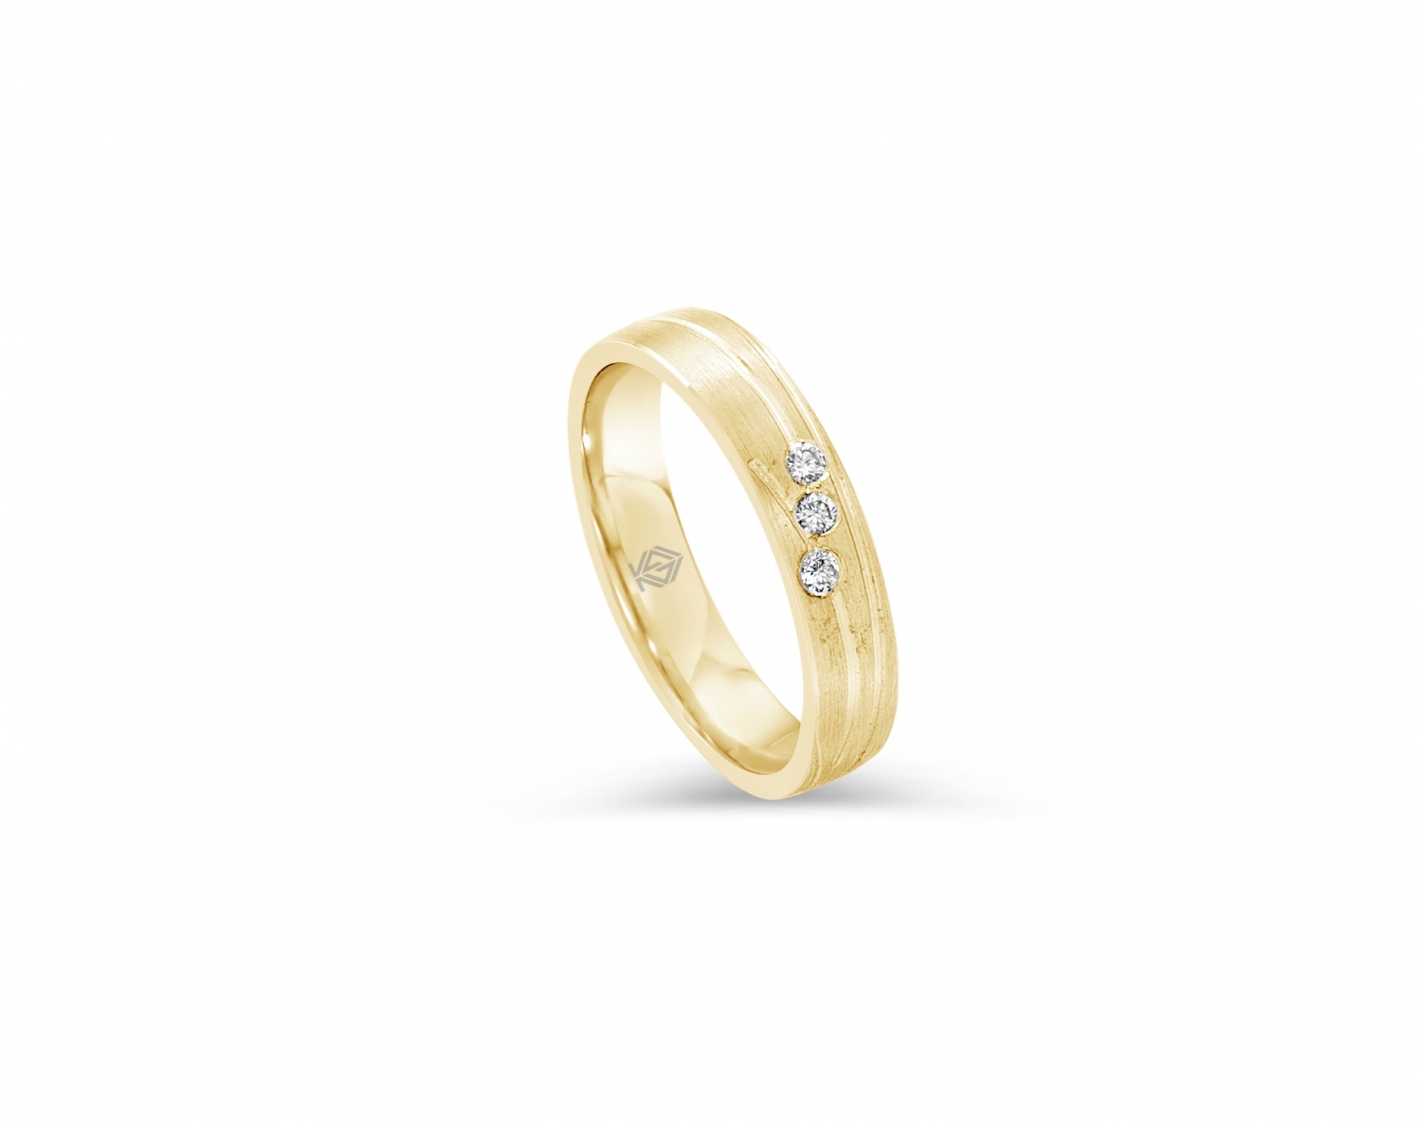 18k yellow gold 4mm matte wedding ring set with three round diamonds and non-parallel inlays